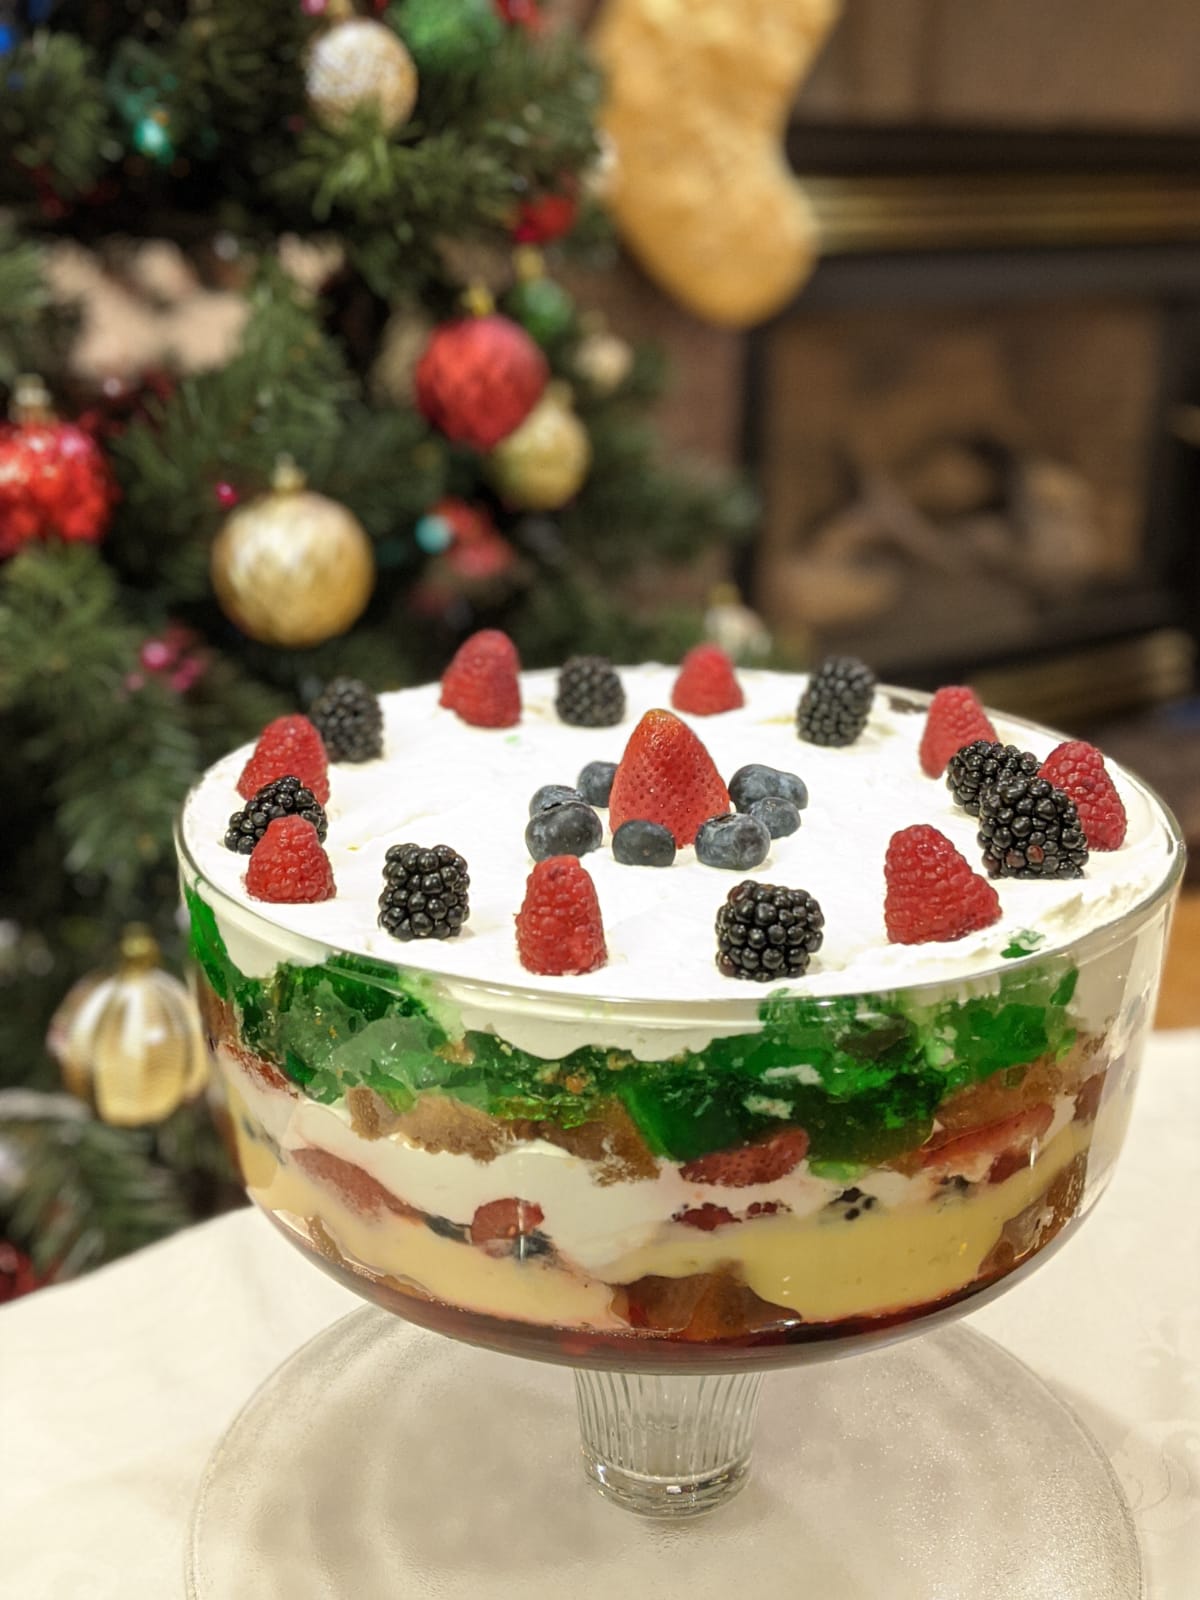 PLATES OF FLAVOUR: English Trifle Was My Signature Dish As A Teen And It Remains A Vibrant Indulgence